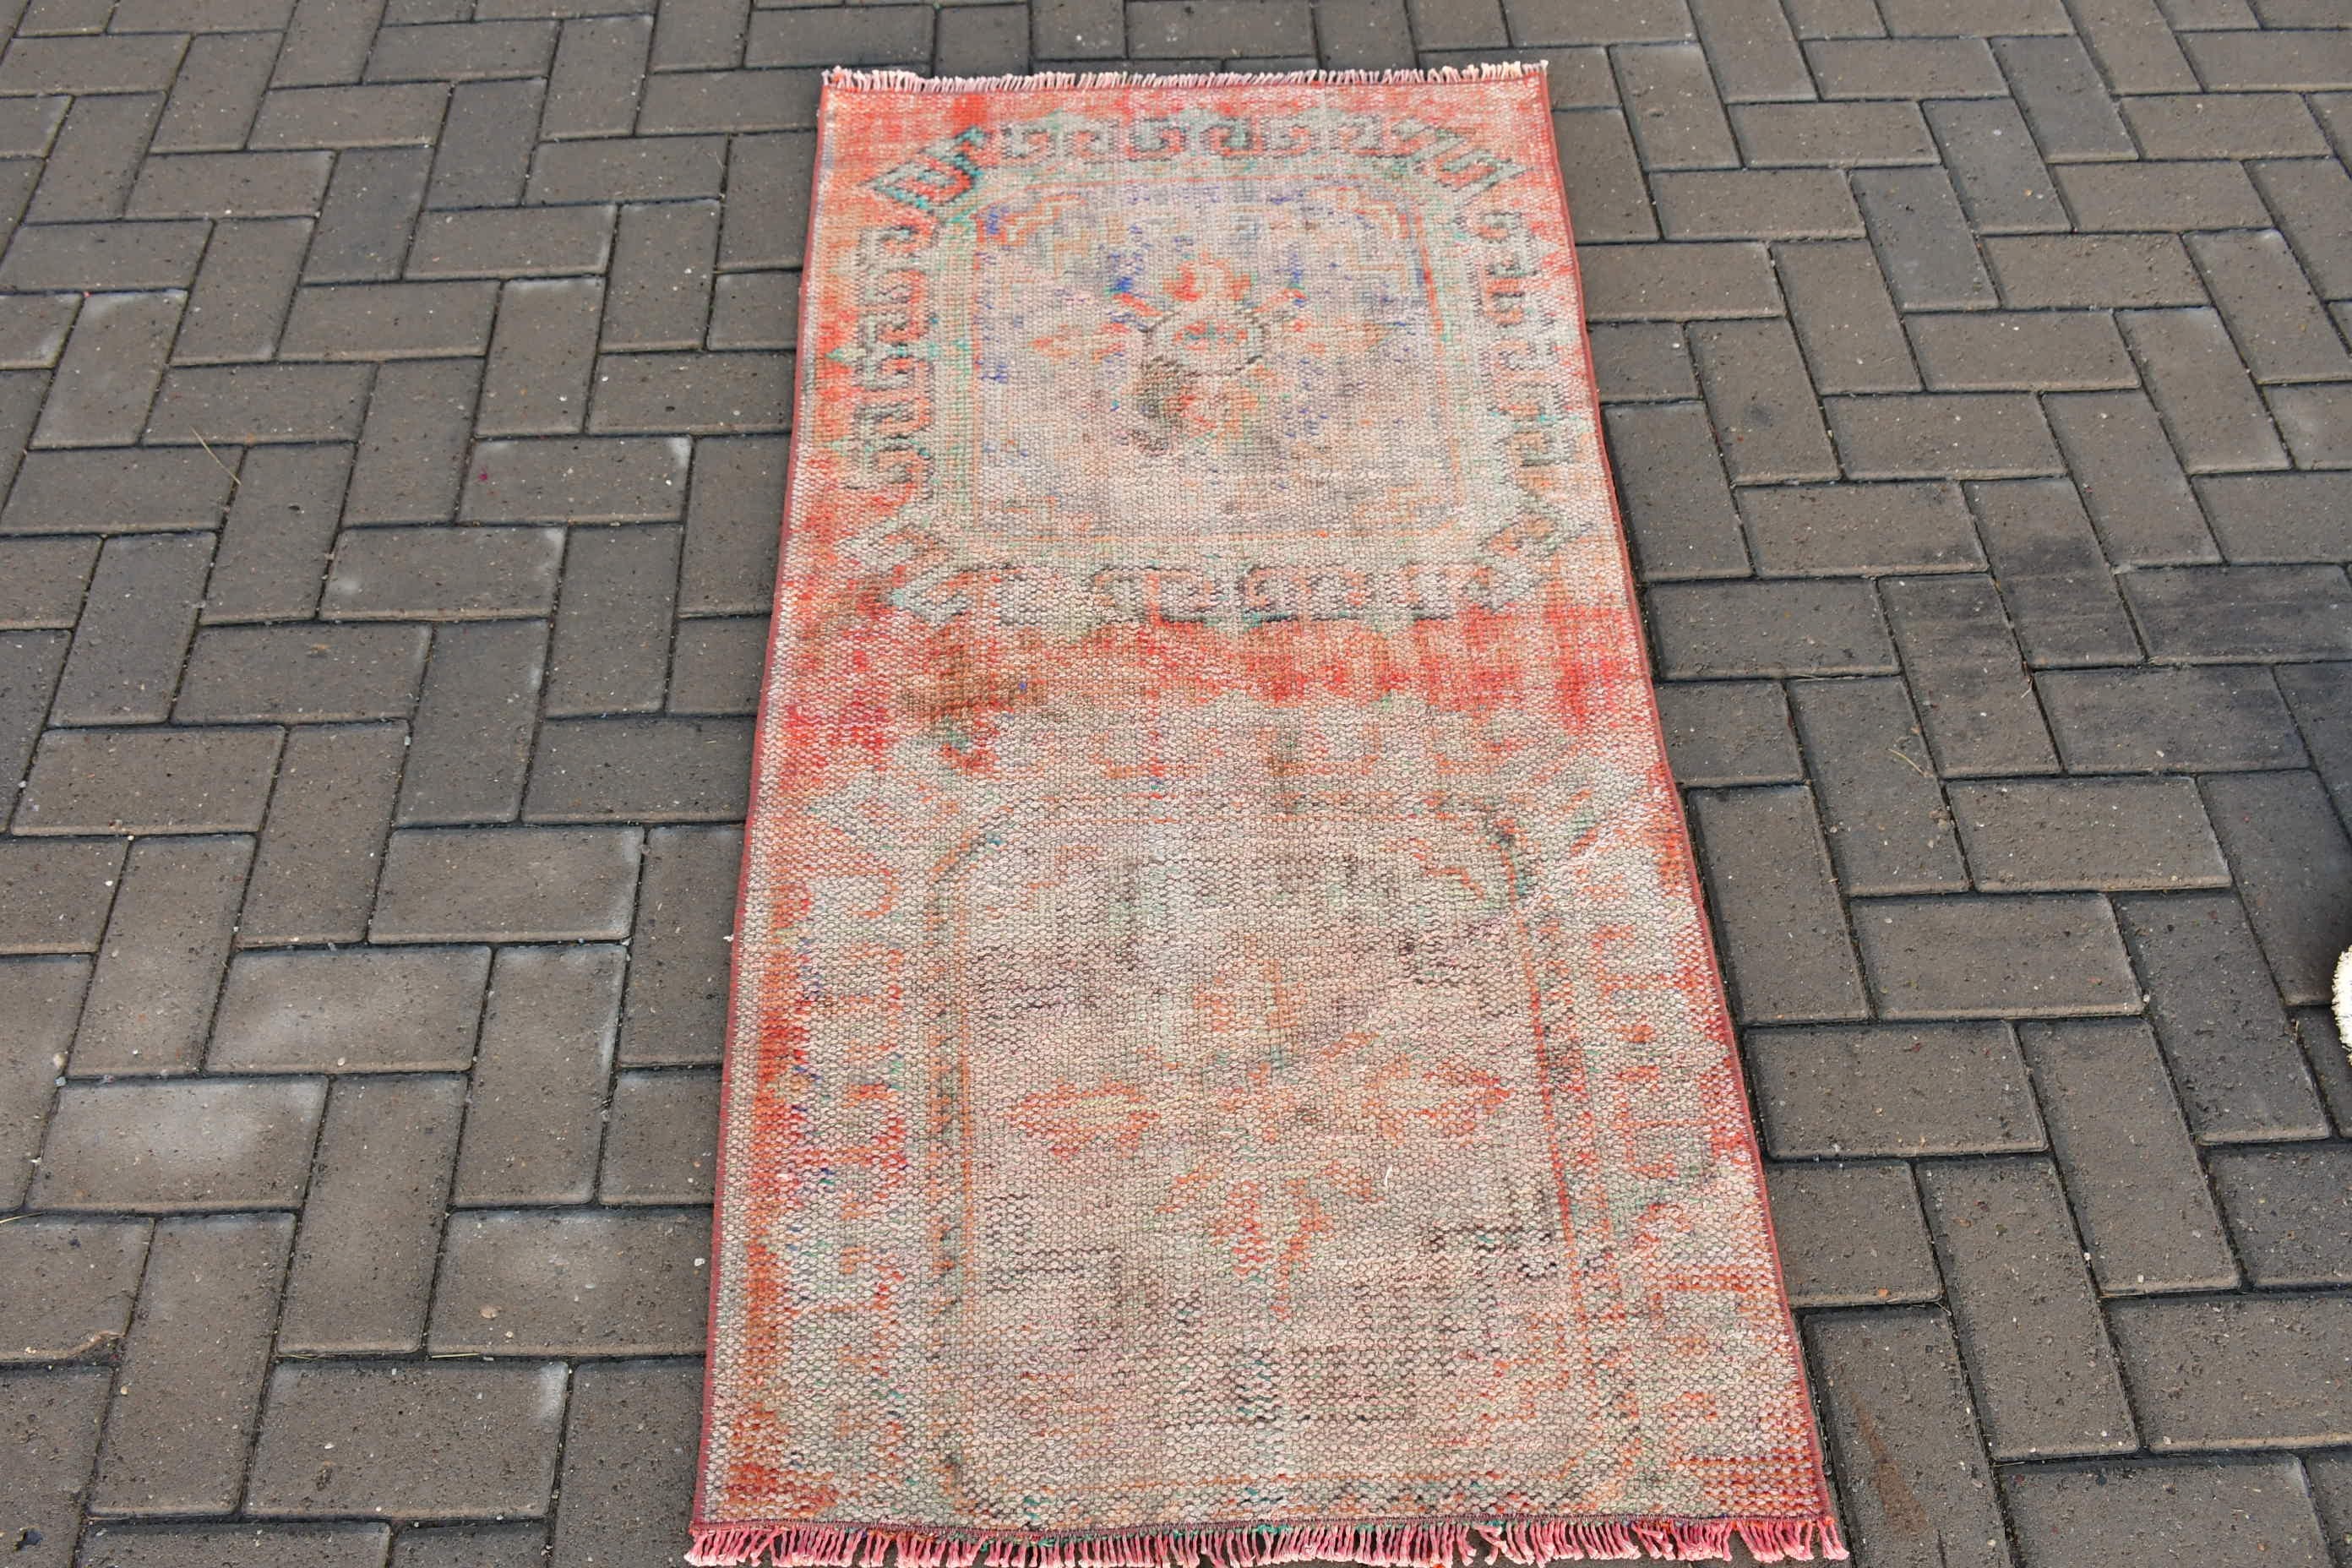 Wool Rug, Entry Rug, Turkish Rug, Rugs for Wall Hanging, Red Home Decor Rug, Vintage Rug, 2.4x4.6 ft Small Rugs, Antique Rug, Bath Rug